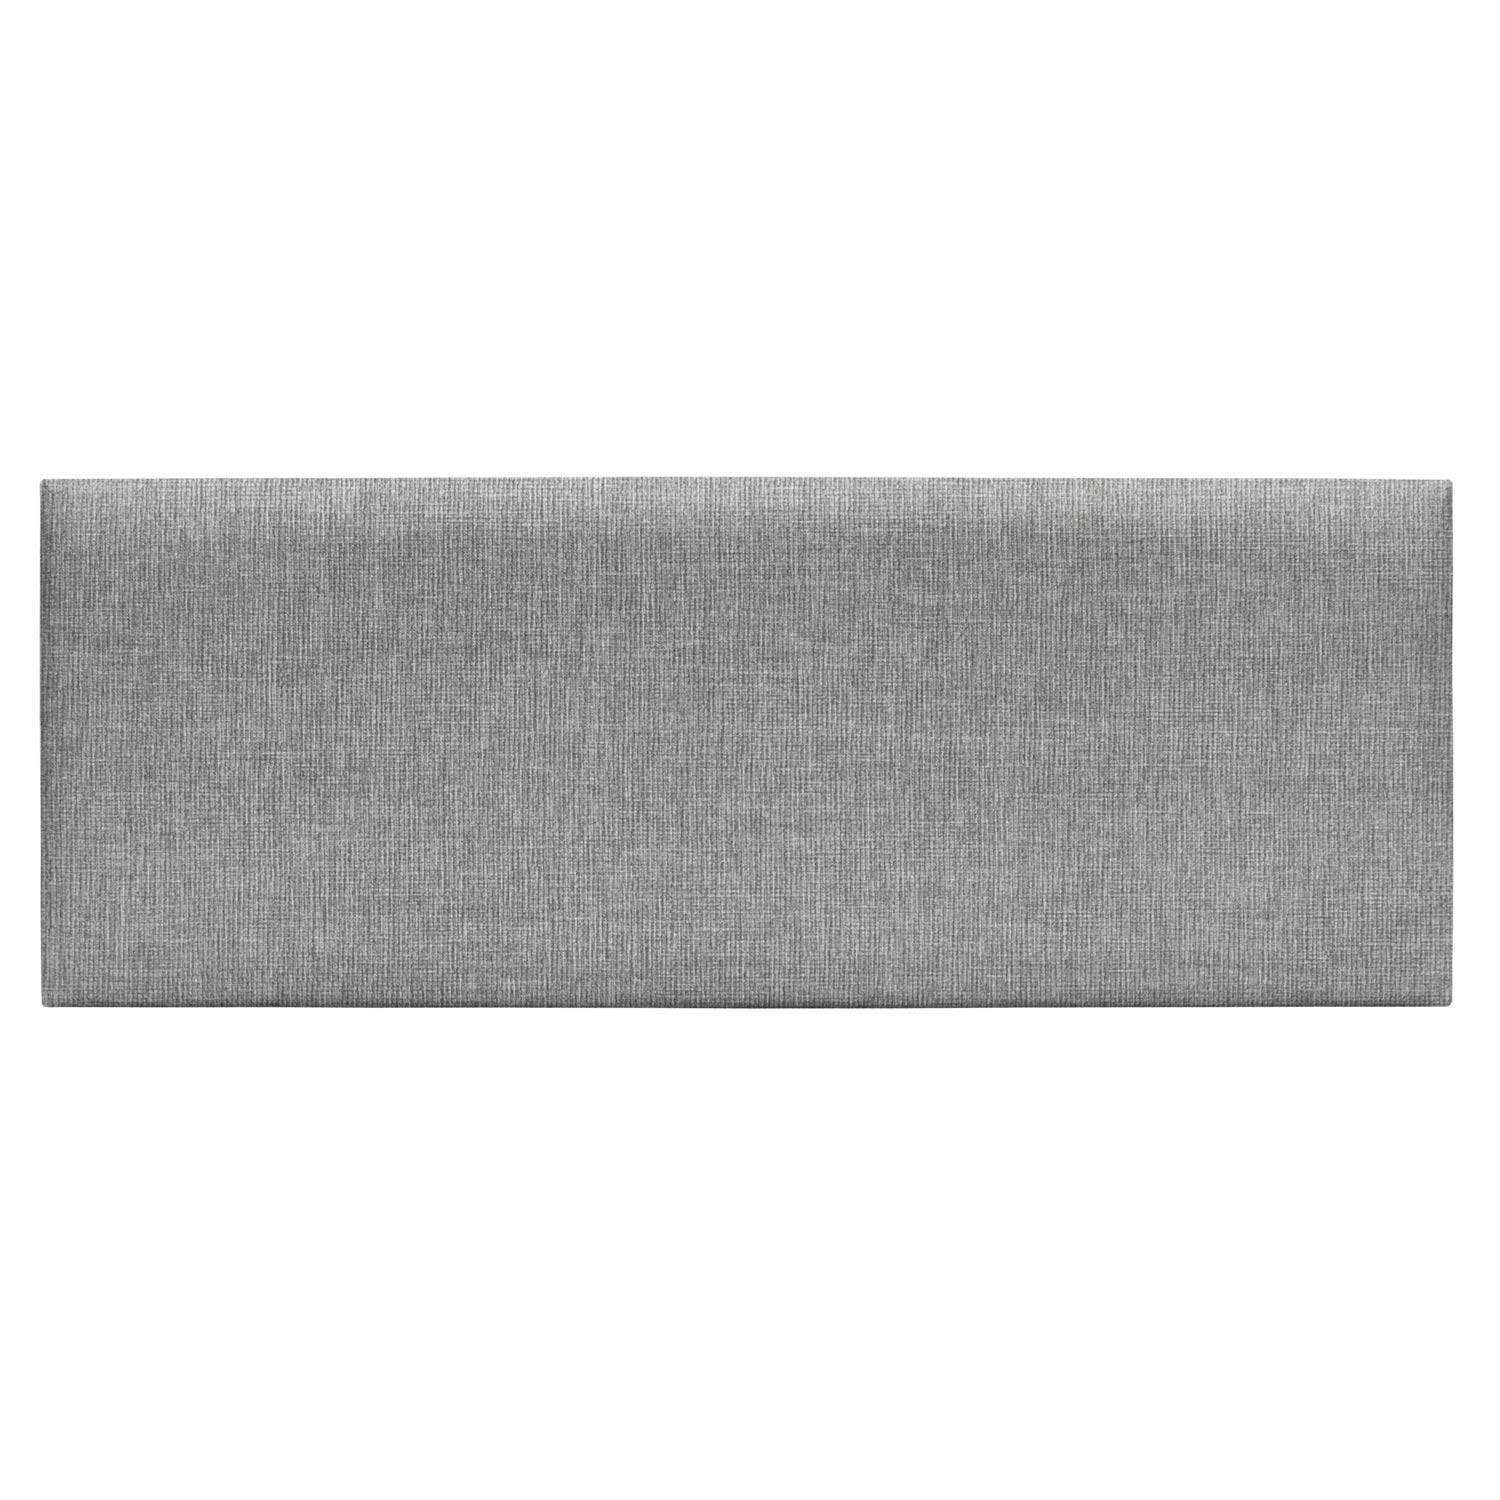 Upholstered Headboard King - Set of 8 panels Removable Accent Leather Wall Panels - Gray 39.4